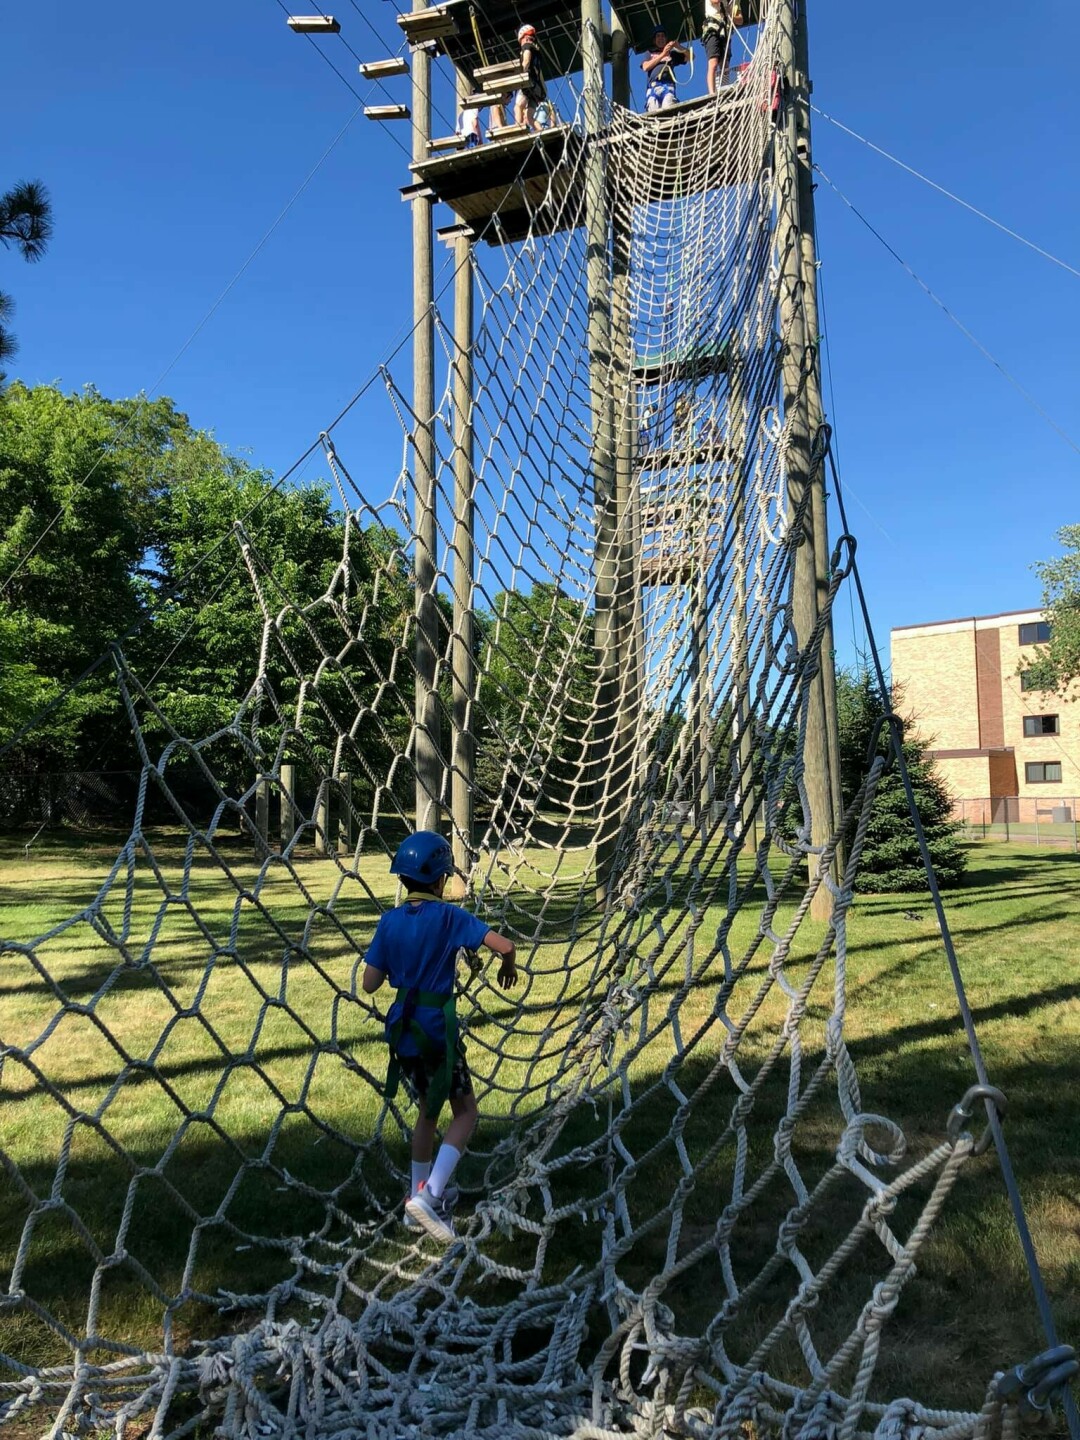 CLIMB AMONG THE CLOUDS. The Szymanski family tackled the ropes course this past weekend. Local middle school English teacher Ken Szymanski affirms it's one of the coolest things to do this summer. (Photo by Sarah Szymanski)